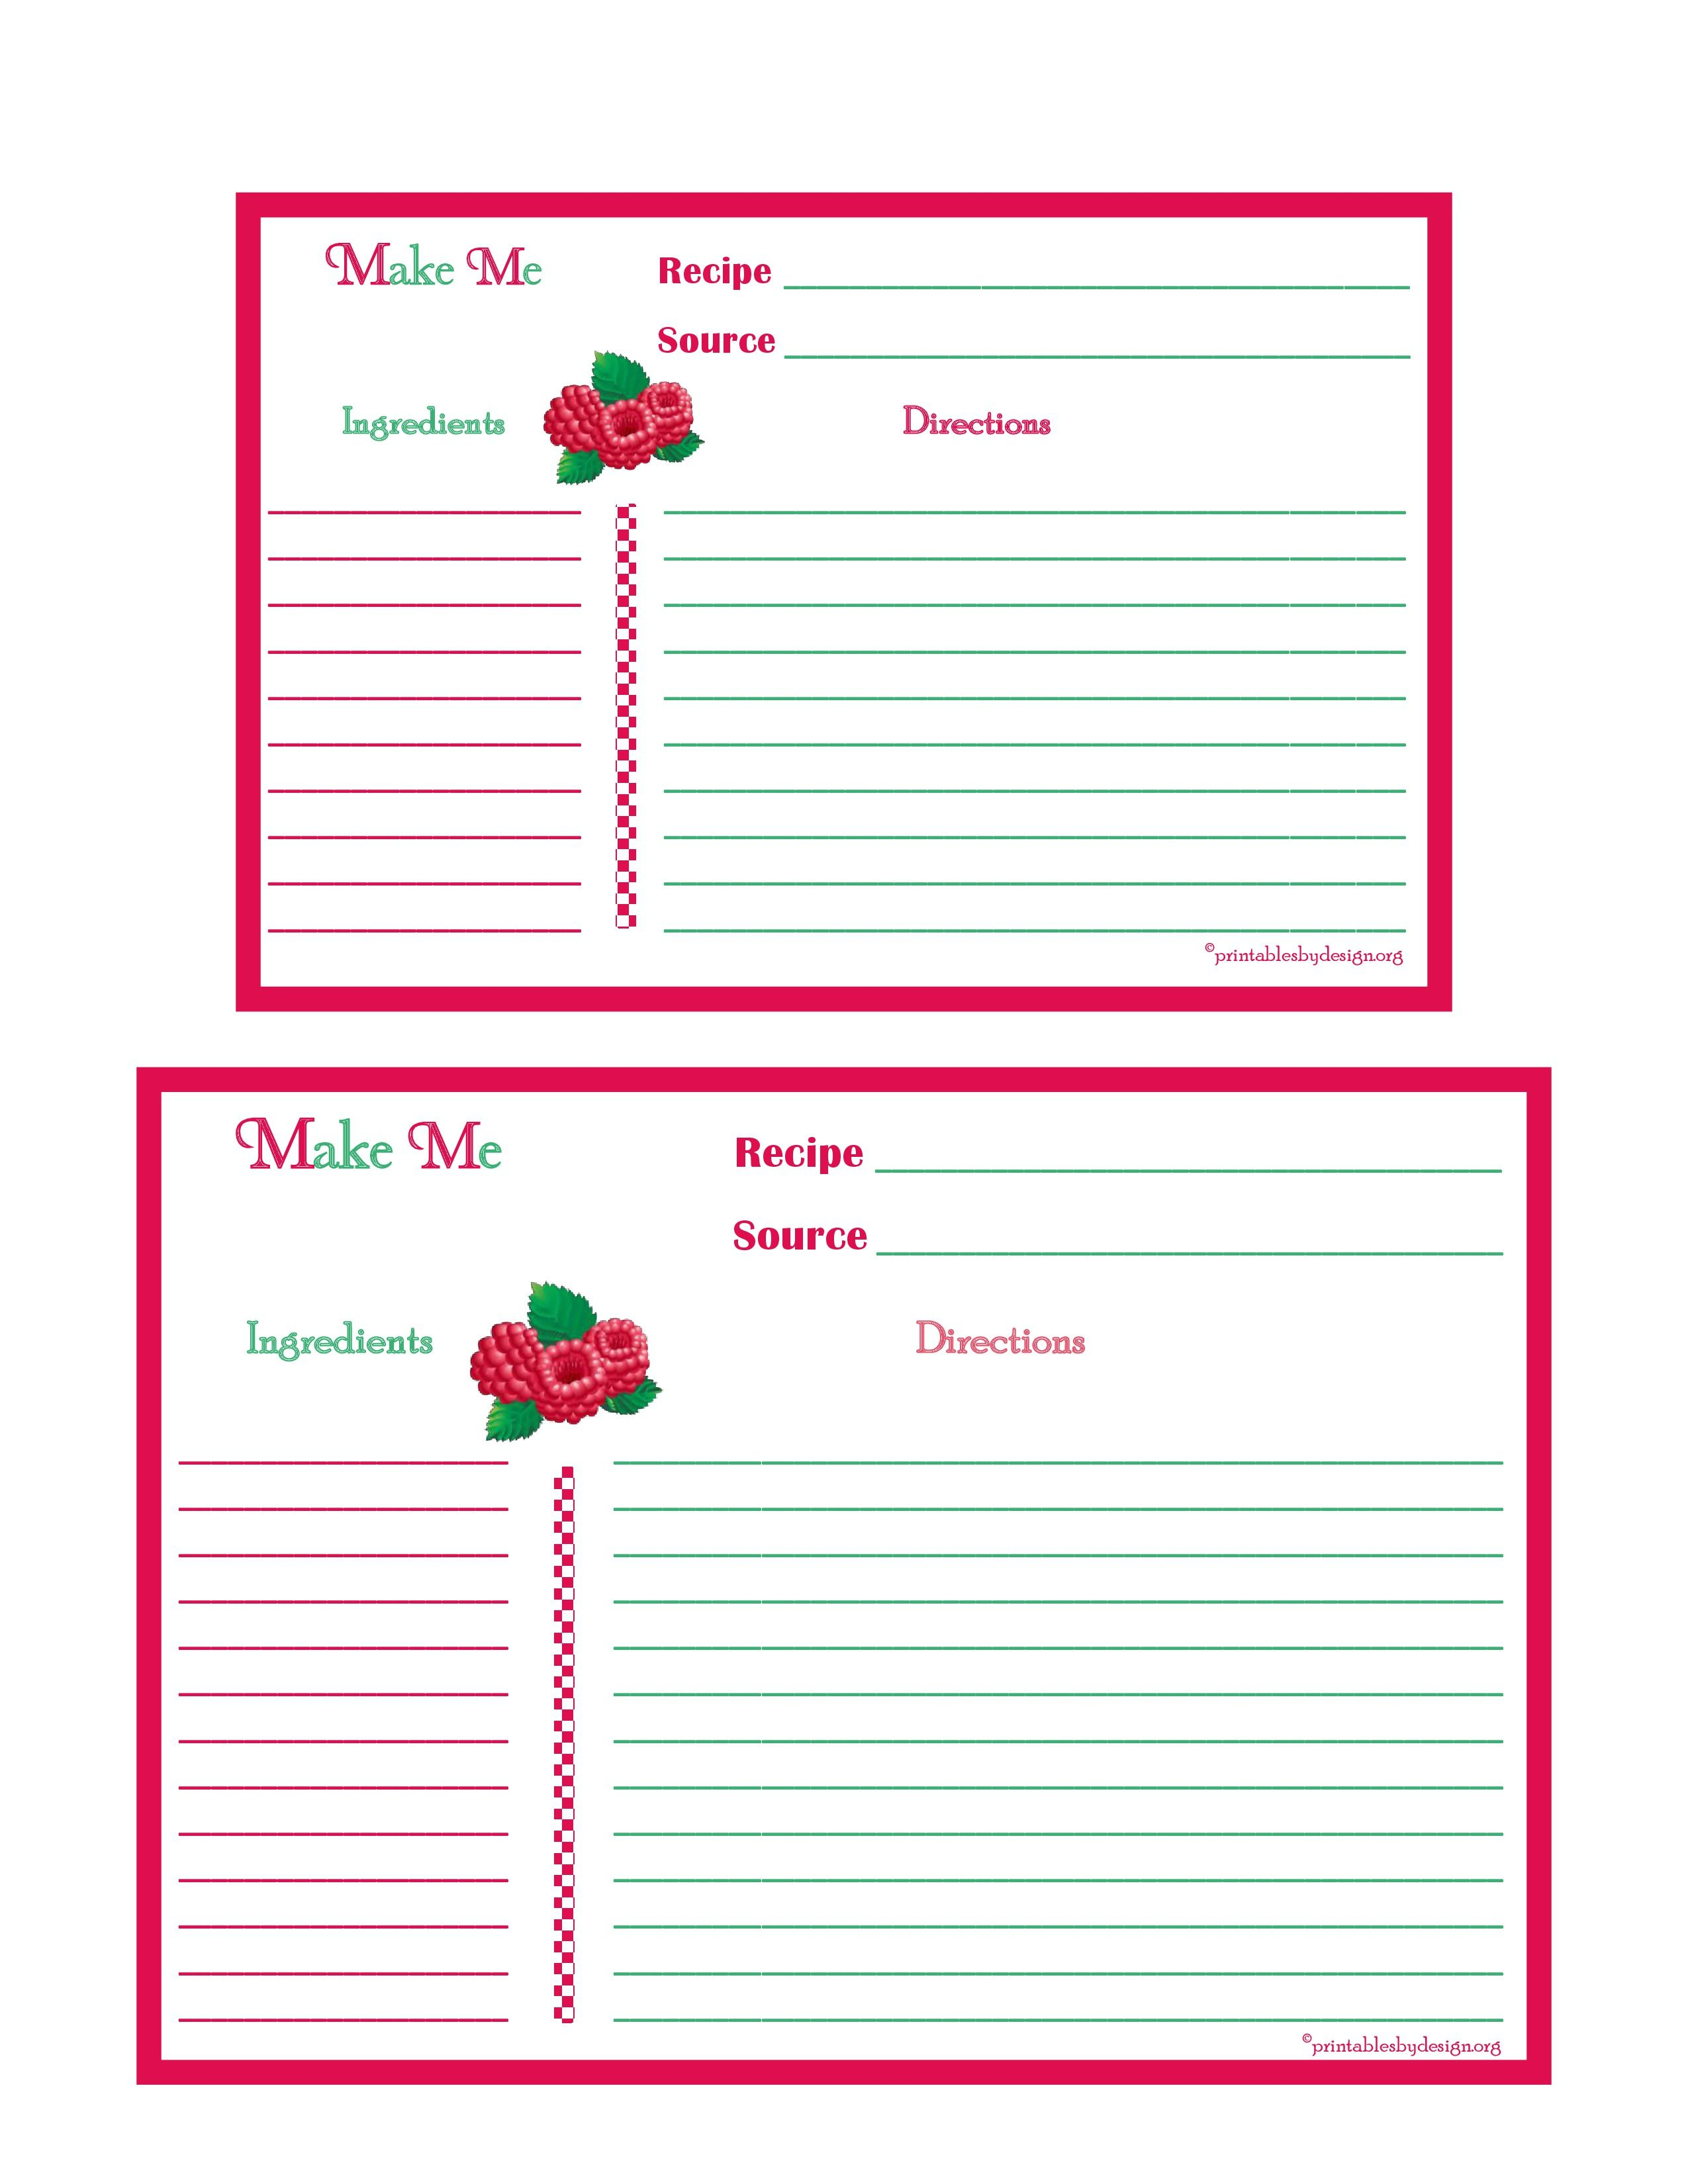 Raspberries Recipe Card - 4X6 &amp;amp; 5X7-Page | Free Recipe Cards - Free Printable Photo Cards 4X6